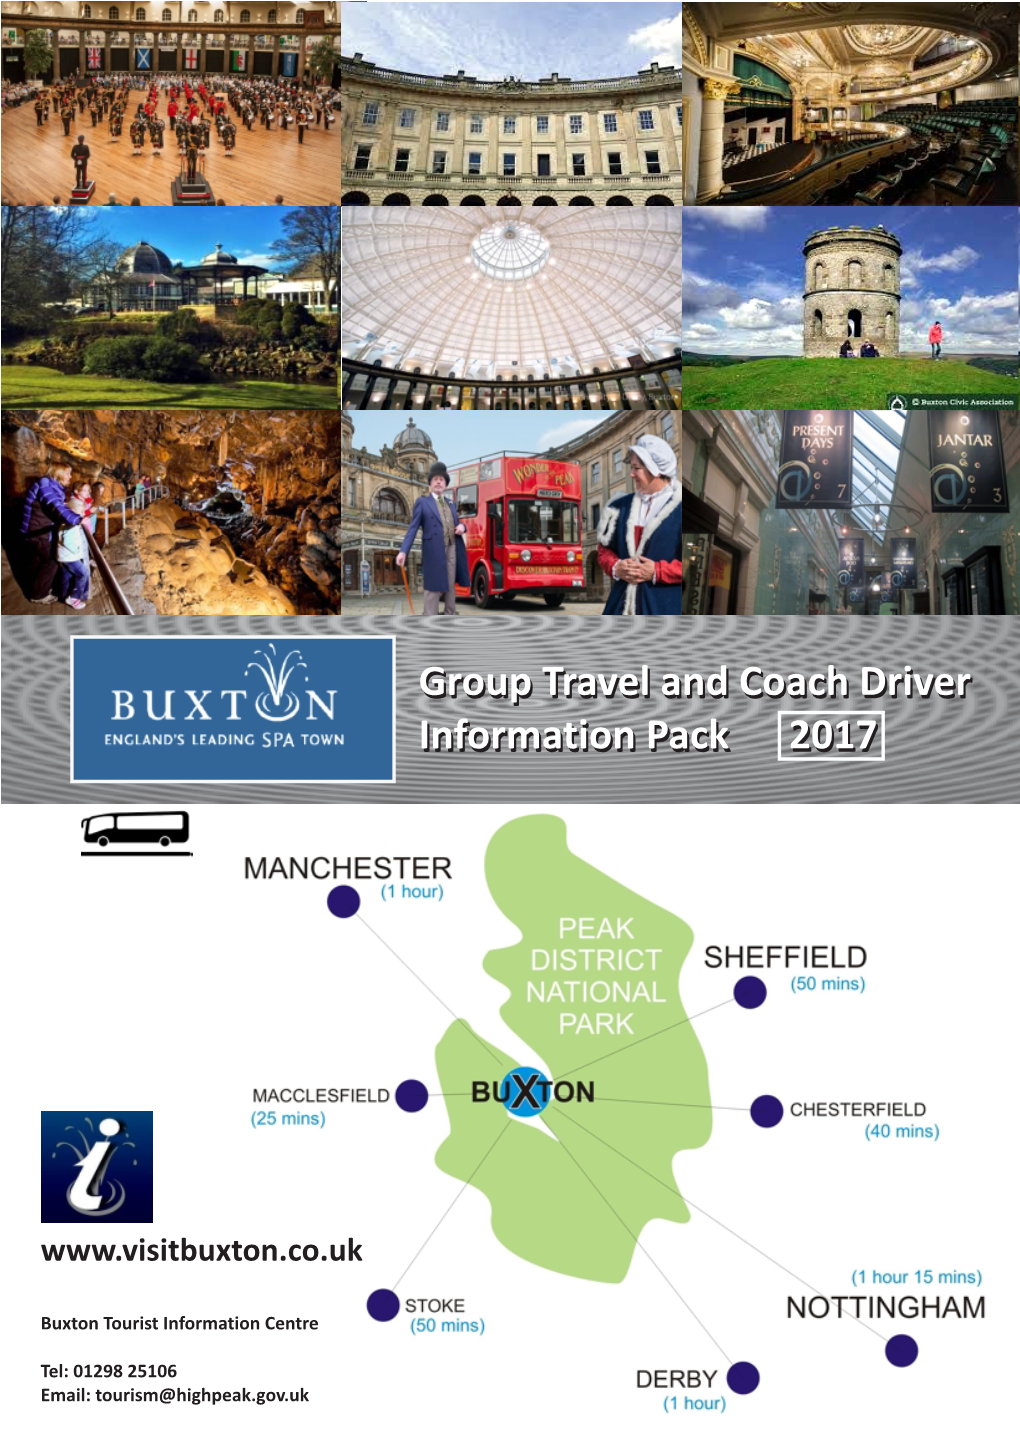 Group Travel and Coach Driver Information Pack